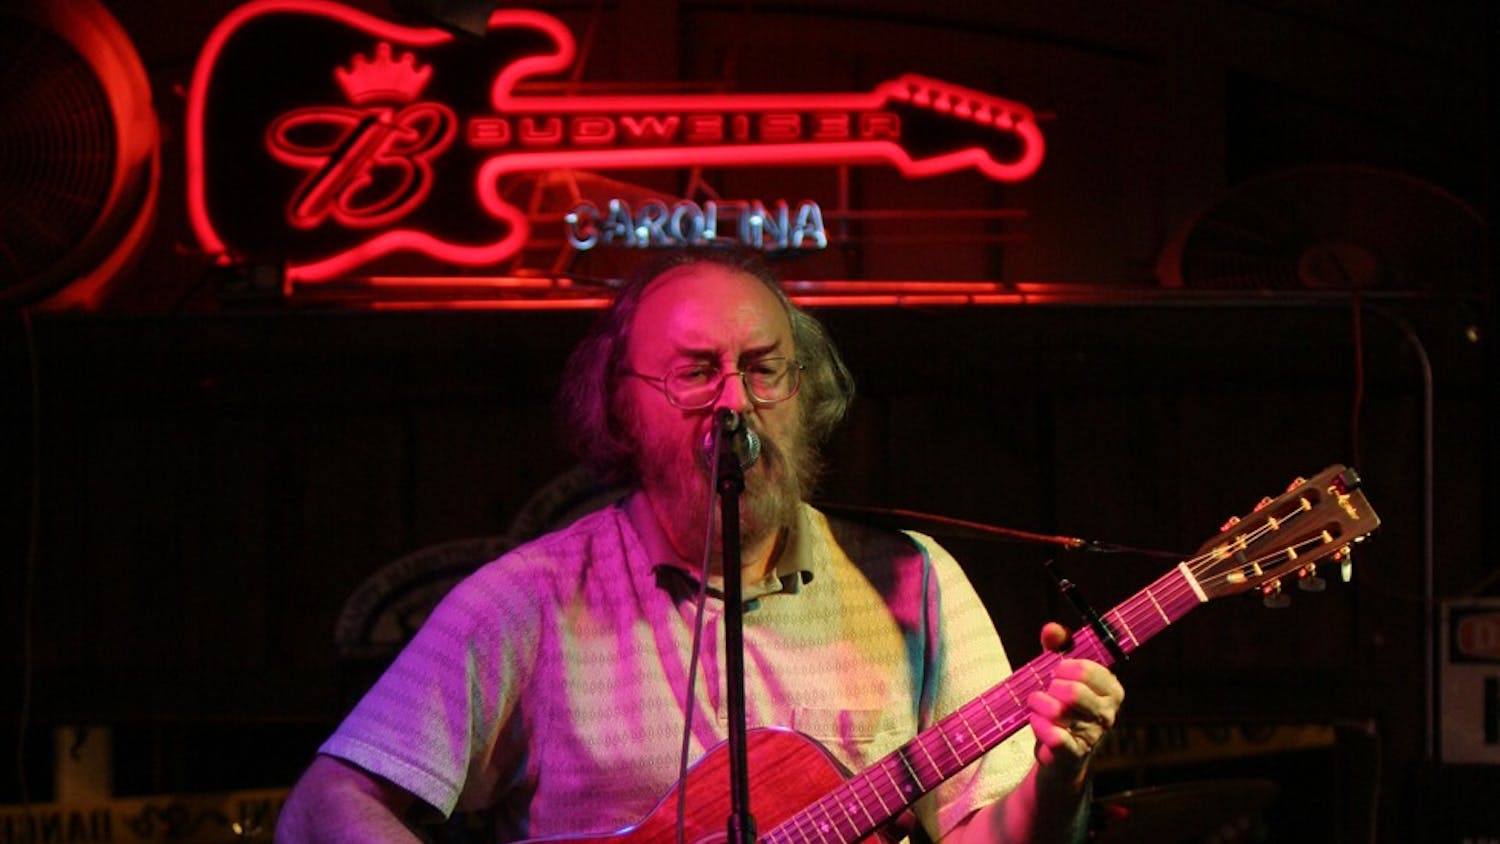 Whit Price plays a short set at Tuesday night’s Open Mic with Bill West,  a new feature at Katy at the Bayou in Hillsborough. Previously known as the Blue Bayou Club, the new bar plans to expand its entertainmen